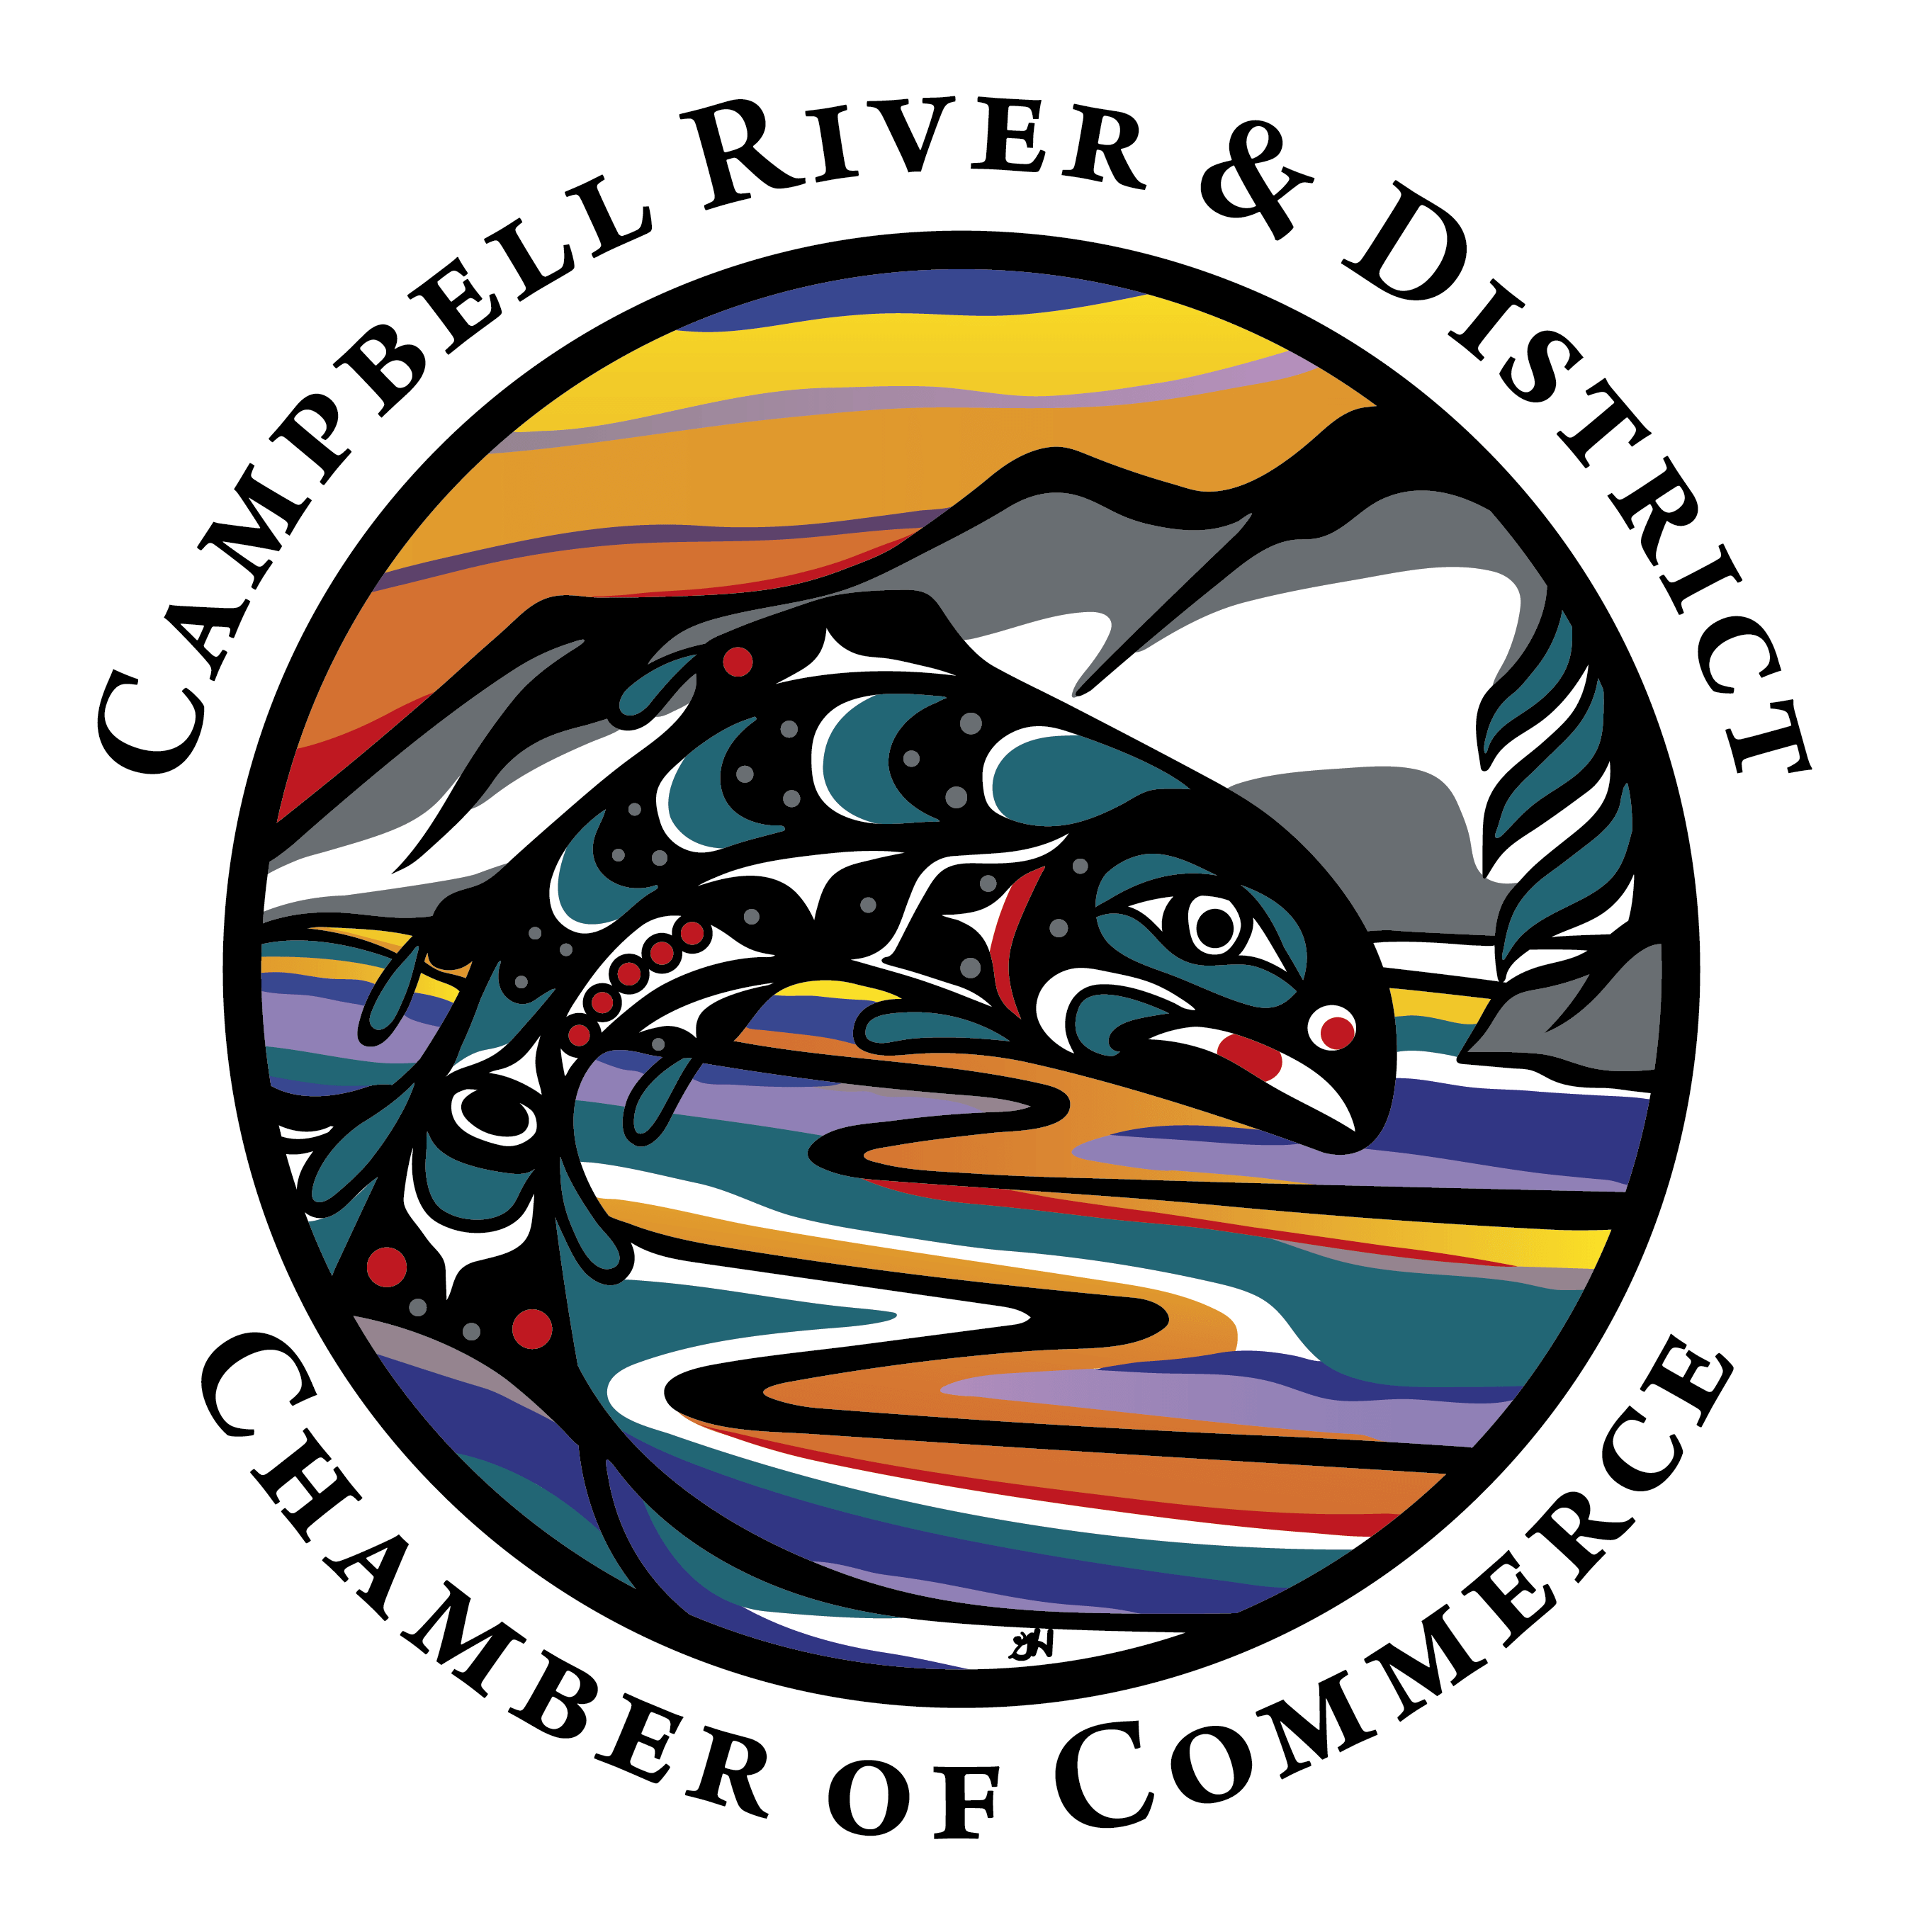 Campbell River & District Chamber of Commerce